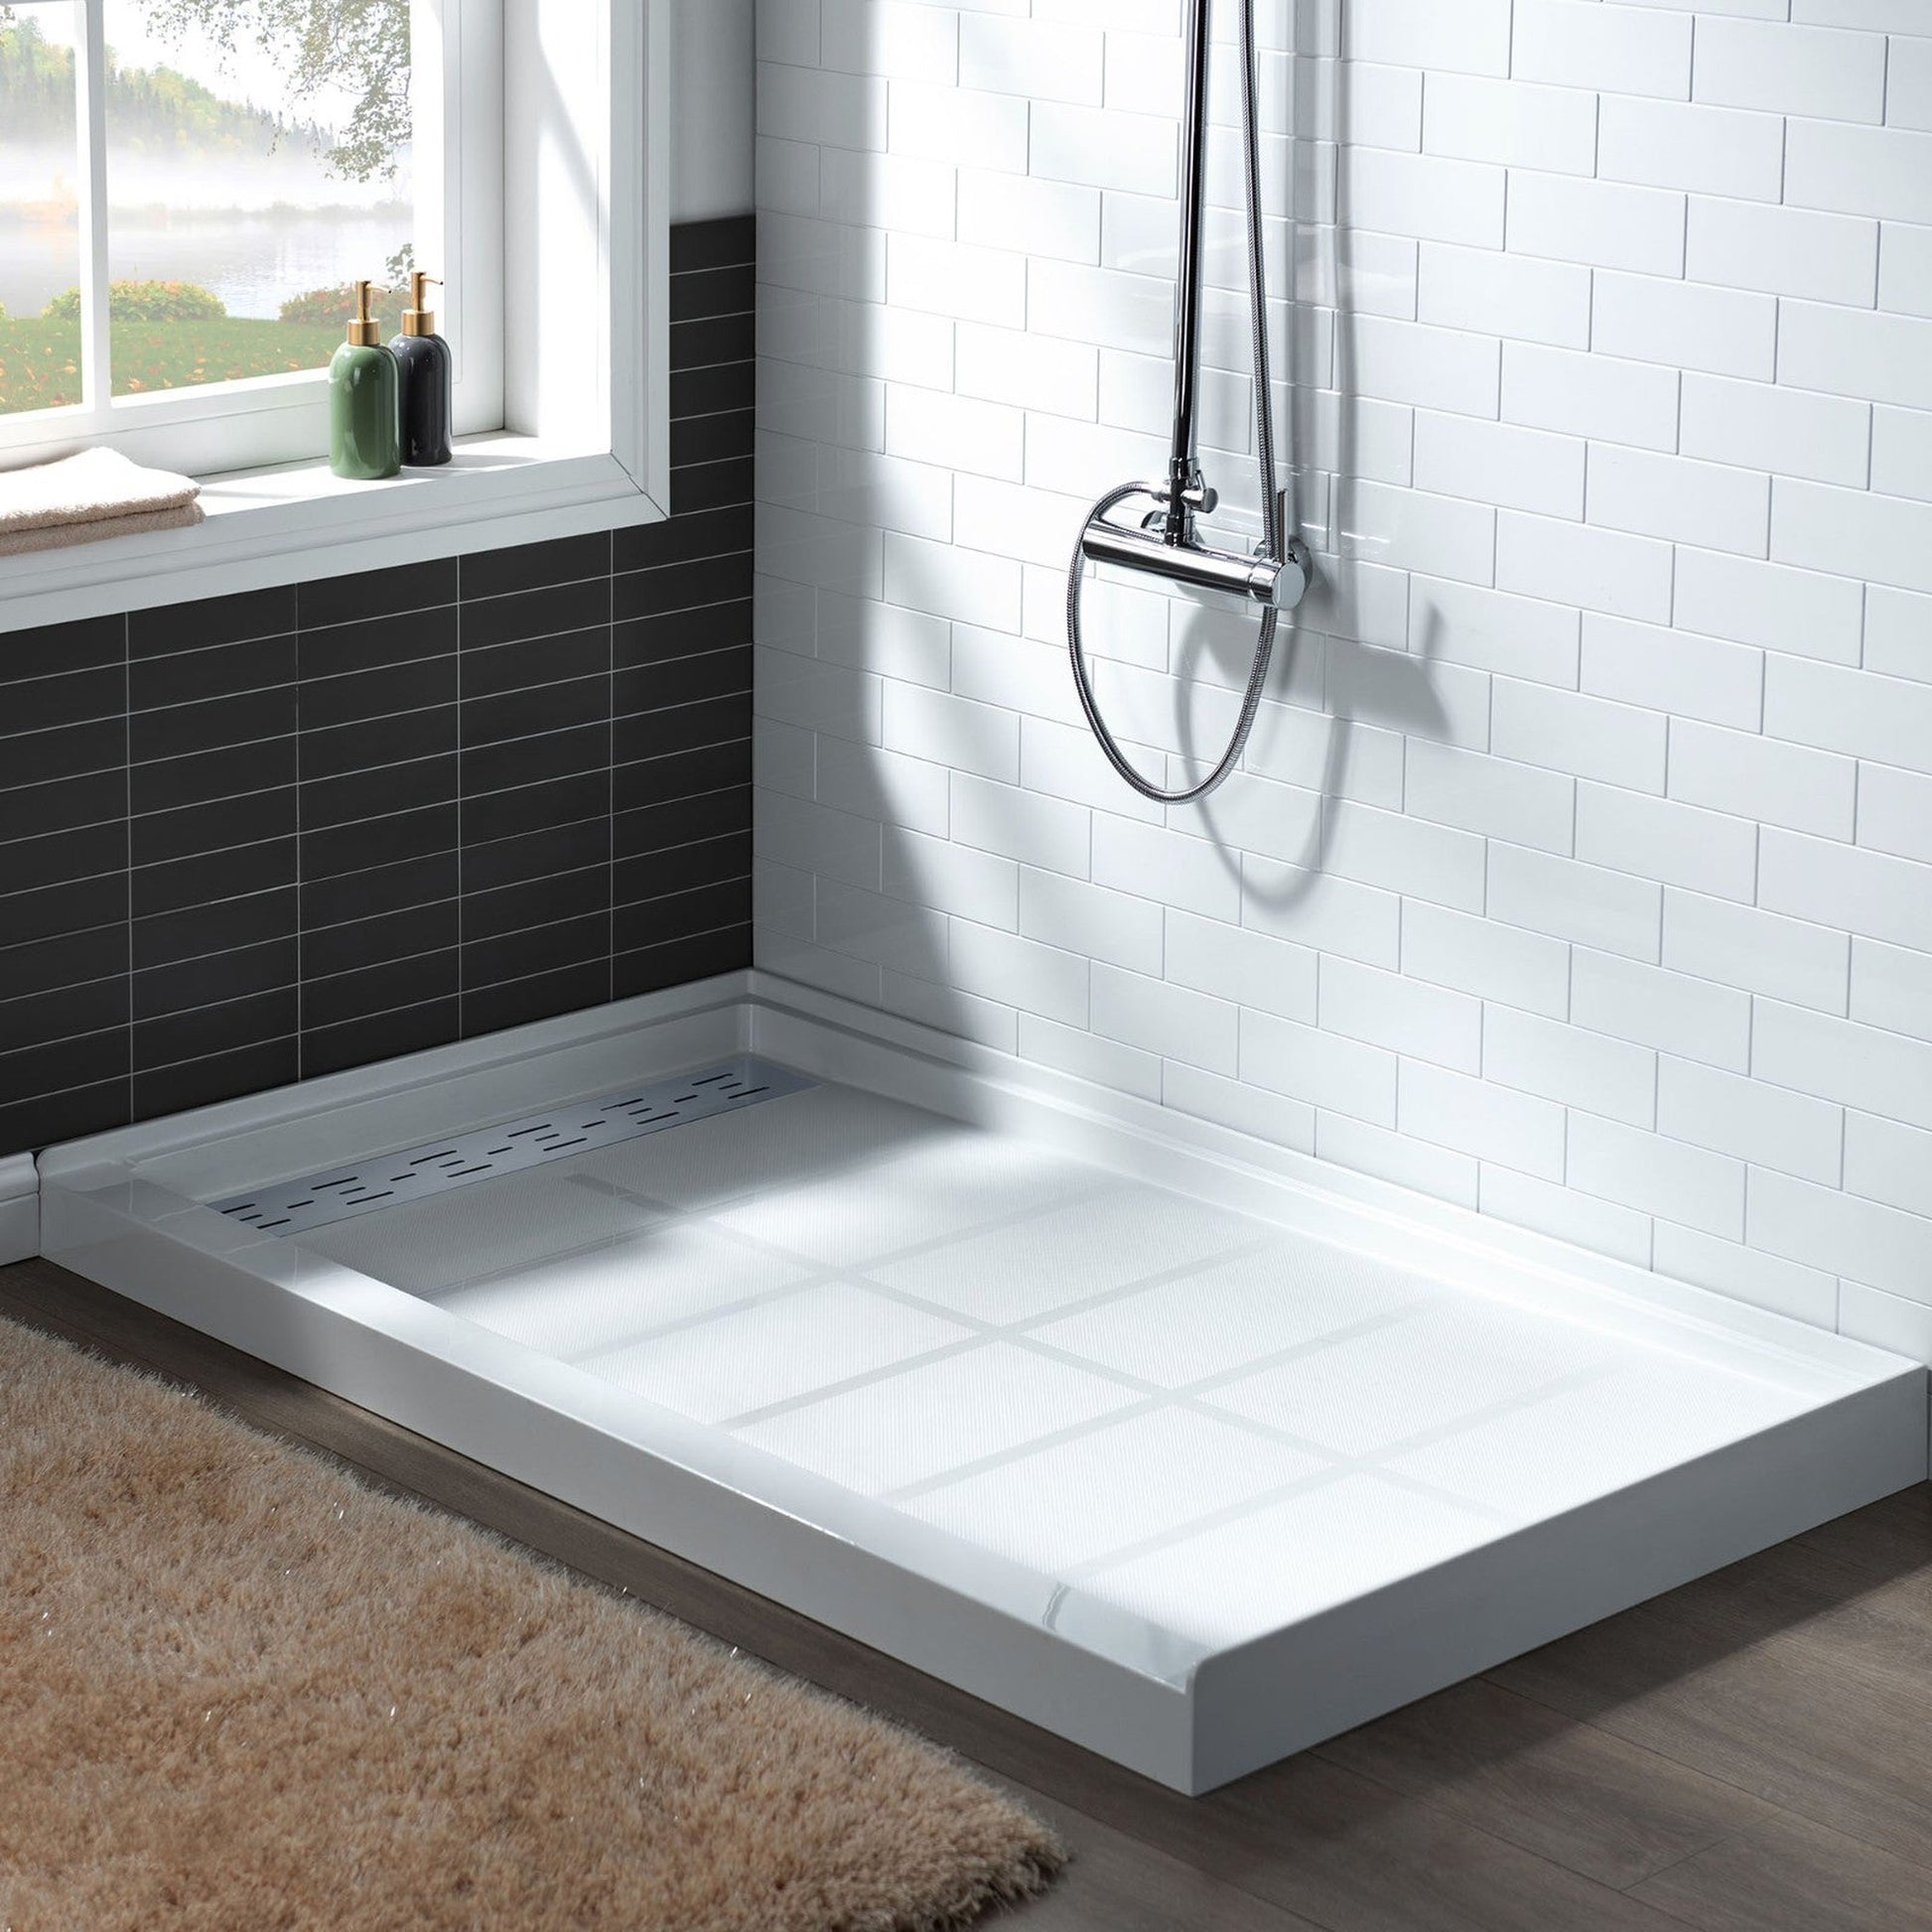 WoodBridge 48" x 32" White Solid Surface Shower Base Left Drain Location With Chrome Trench Drain Cover